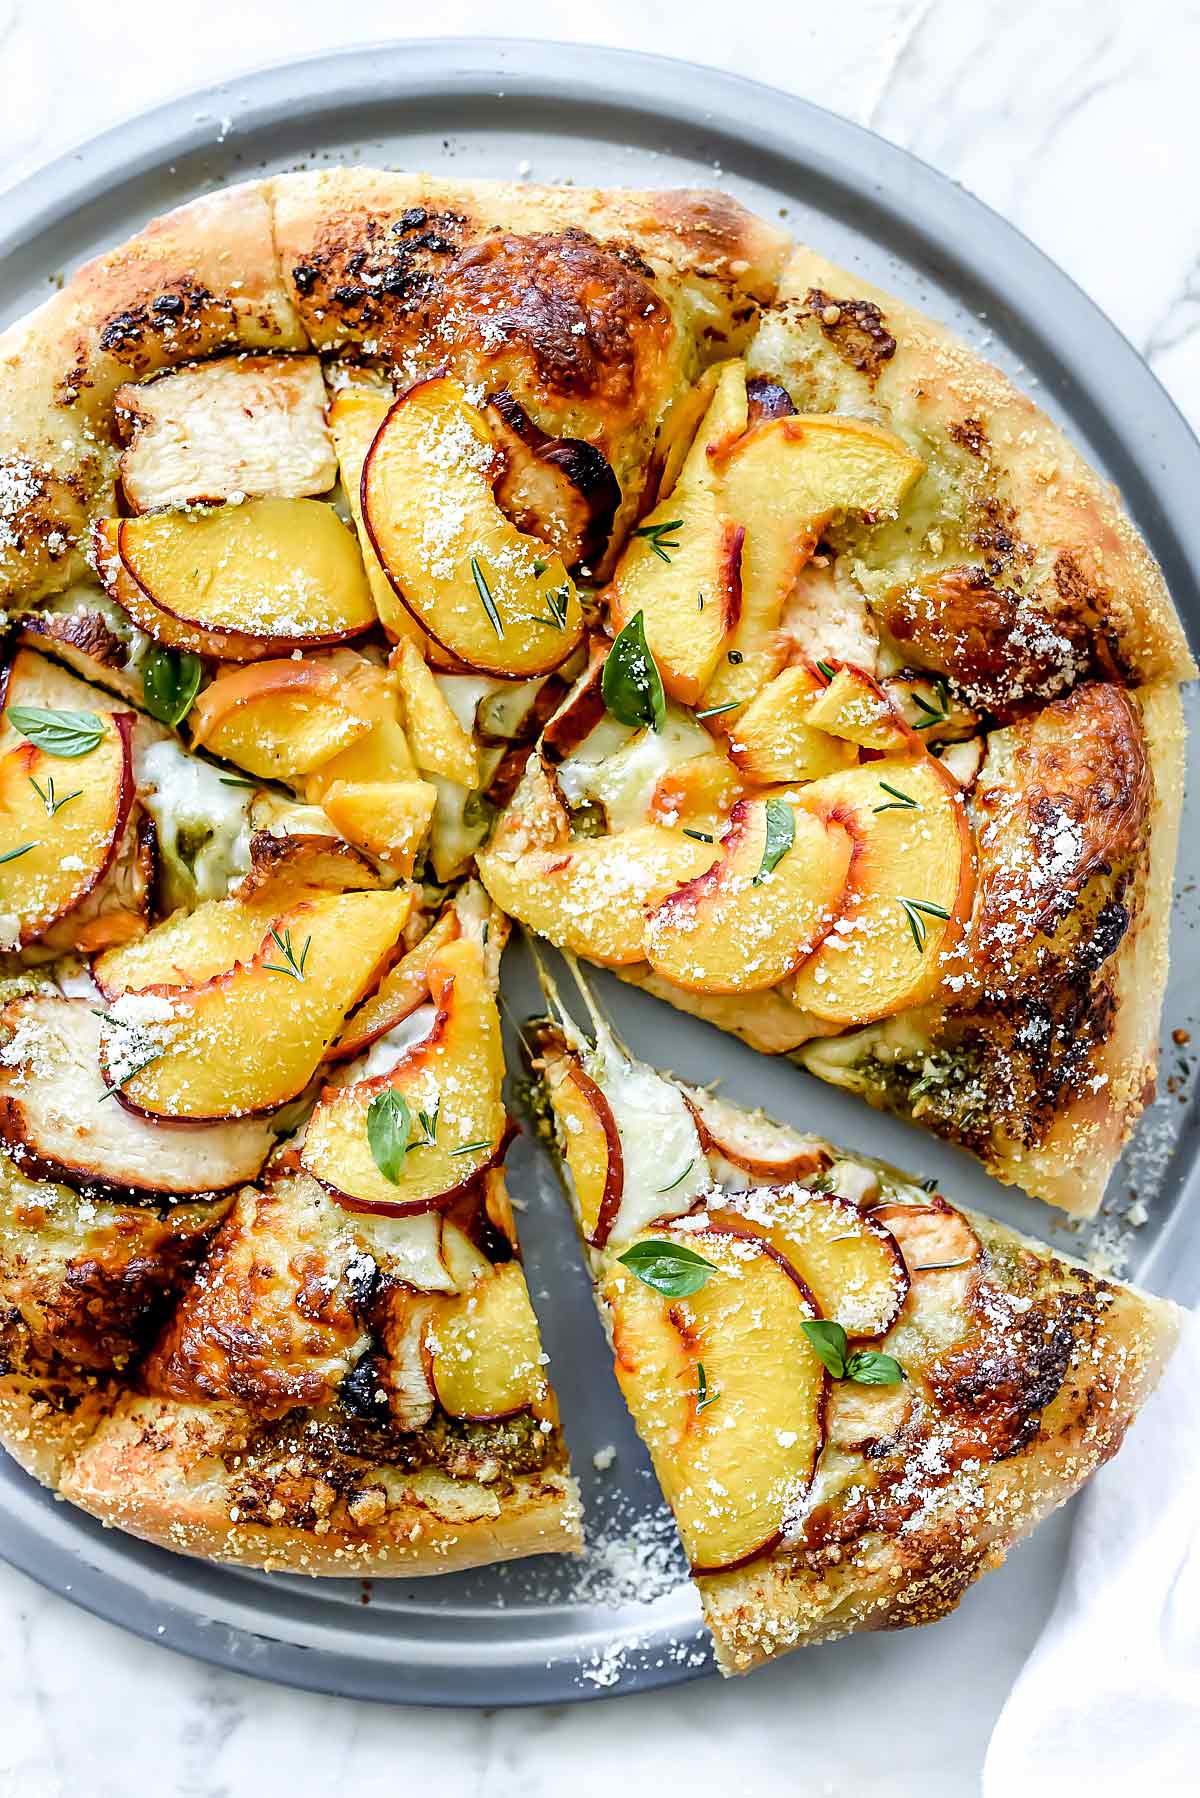 Pesto Pizza with Balsamic Chicken and Peaches | foodiecrush.com